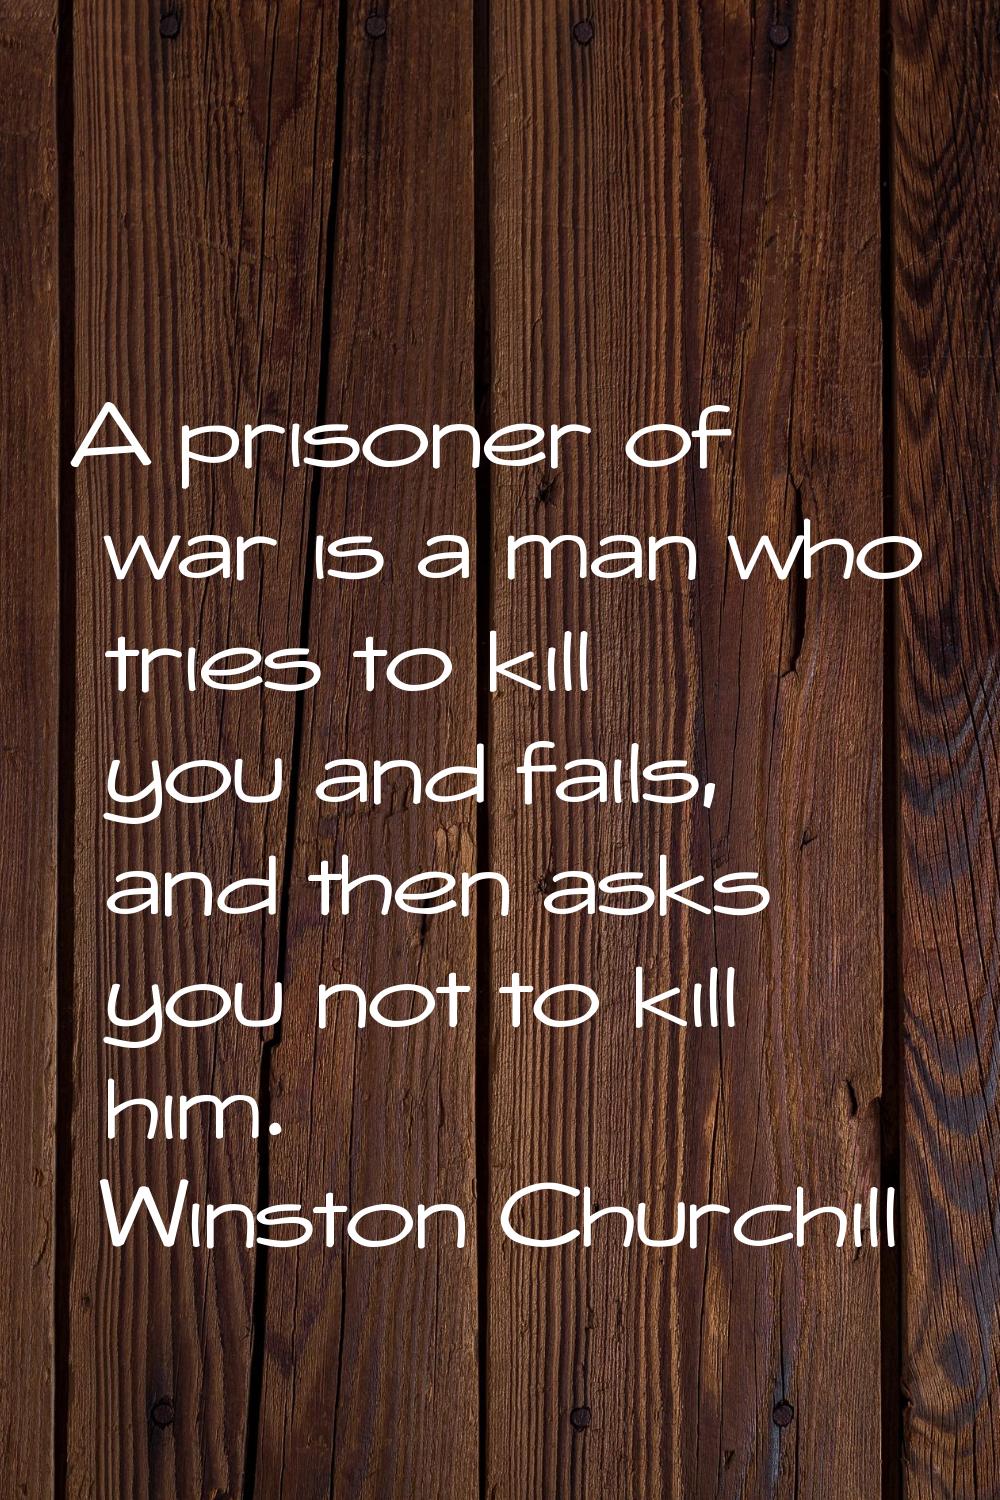 A prisoner of war is a man who tries to kill you and fails, and then asks you not to kill him.